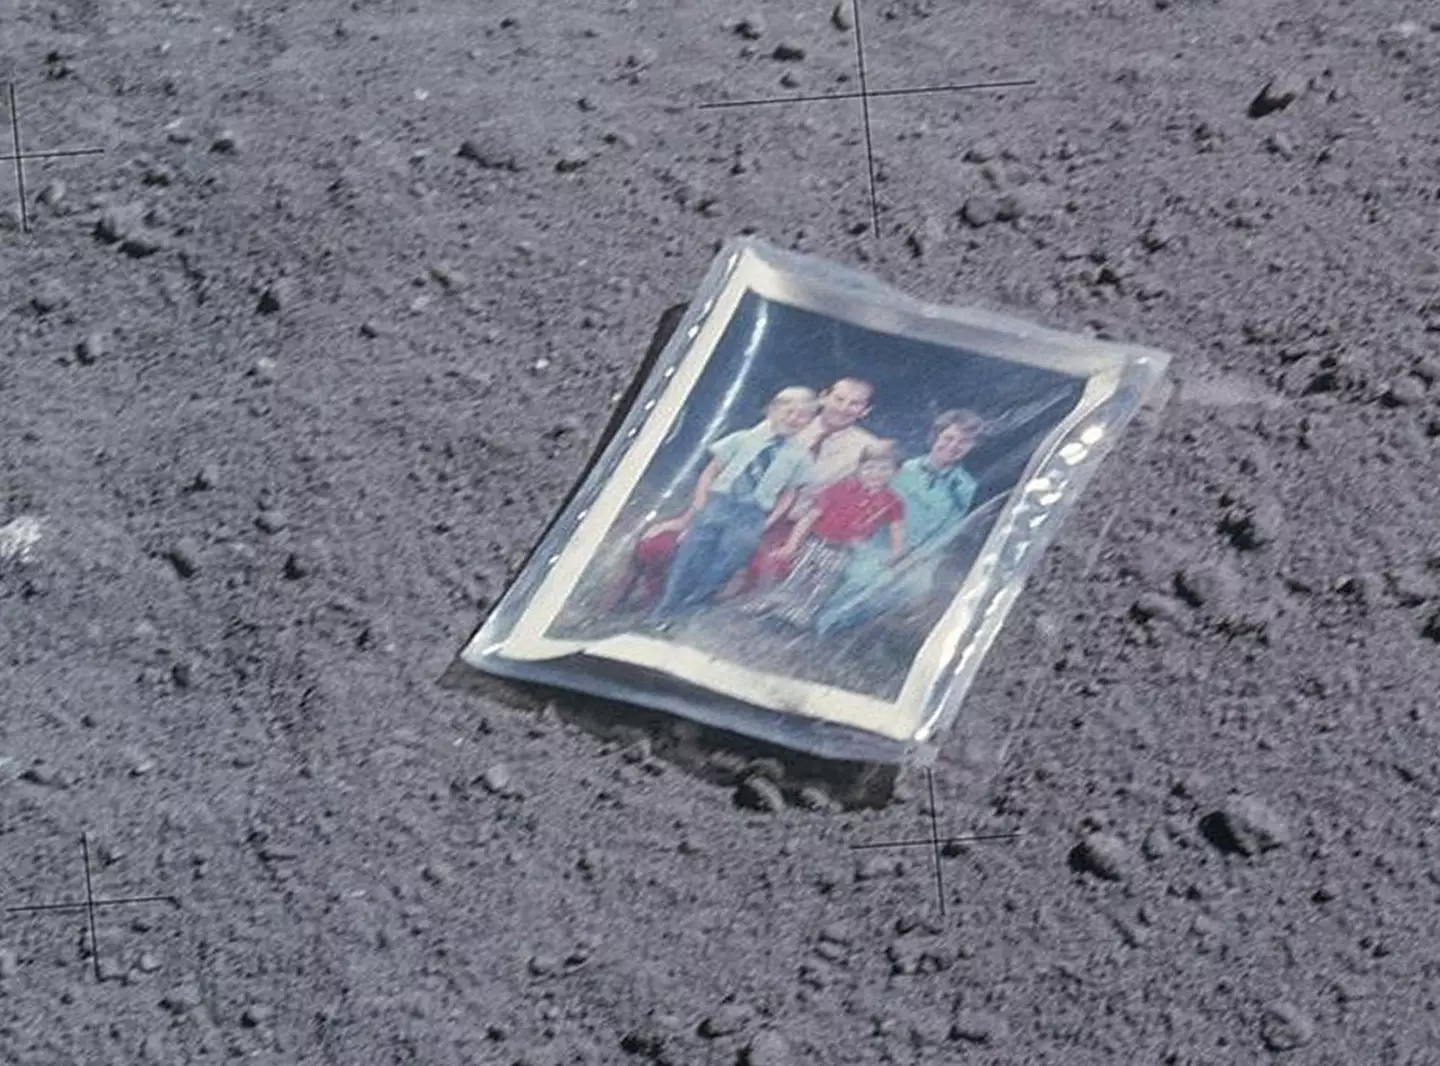 Charles Duke's family photo, it's still up there on the Moon.